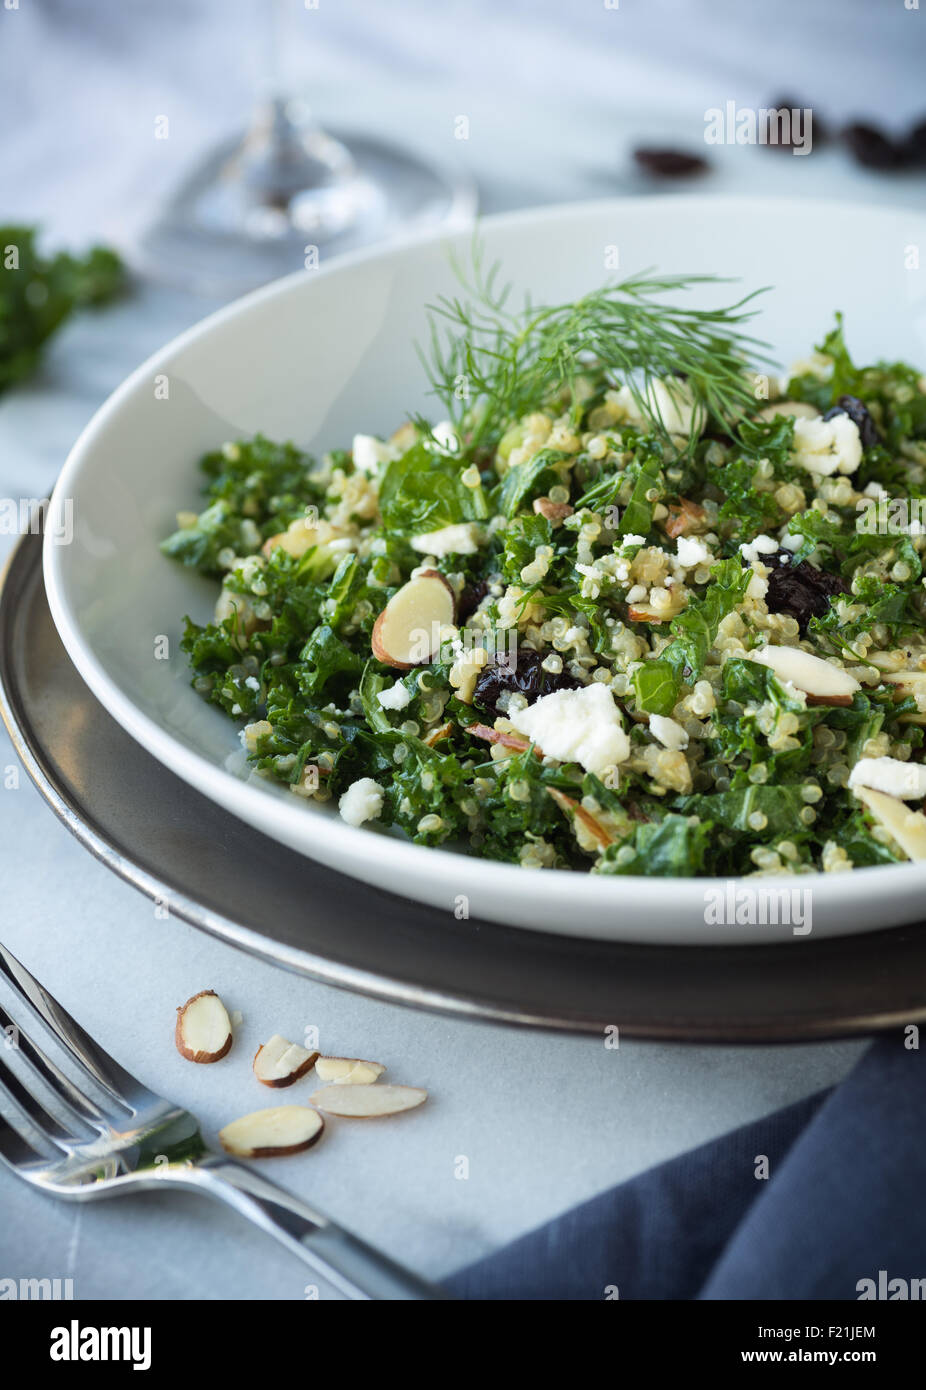 Kale and quinoa salad with dill vinaigrette and almonds Stock Photo